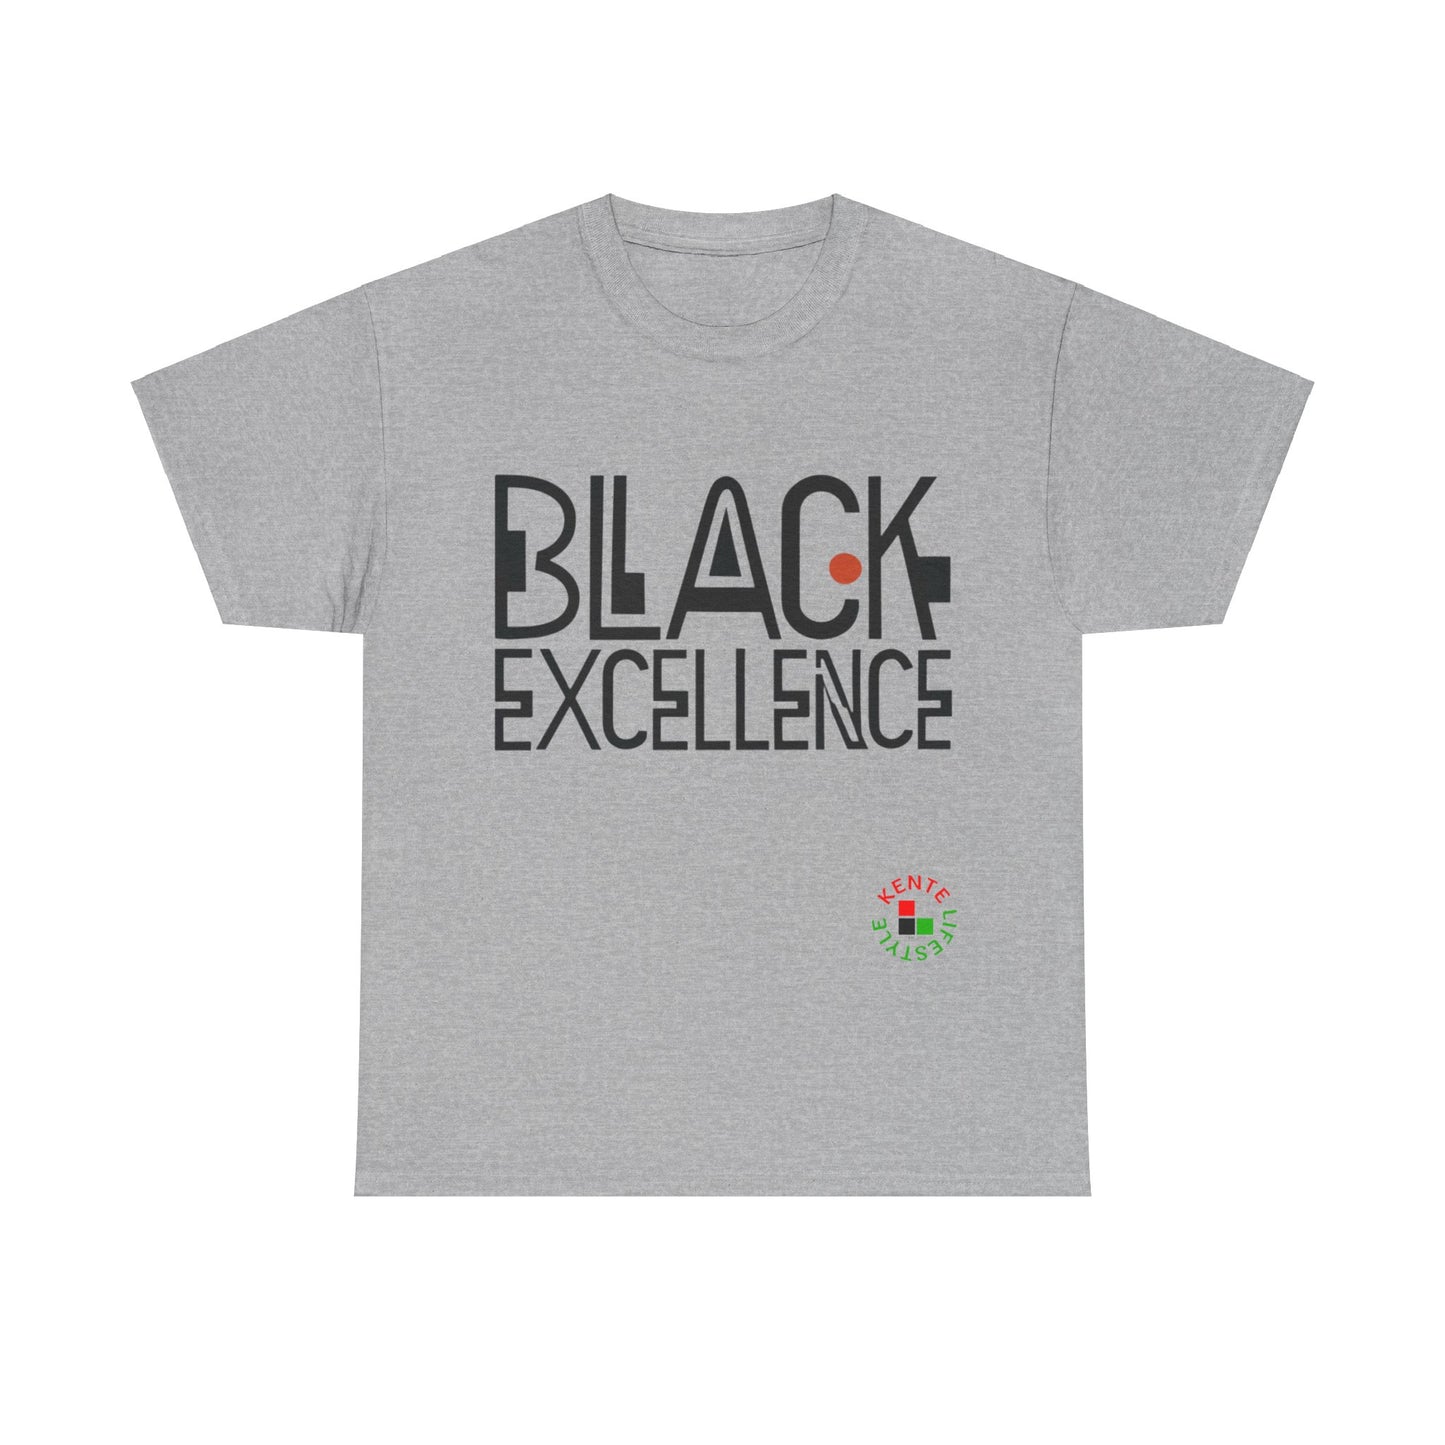 "Black Excellence" T-shirt